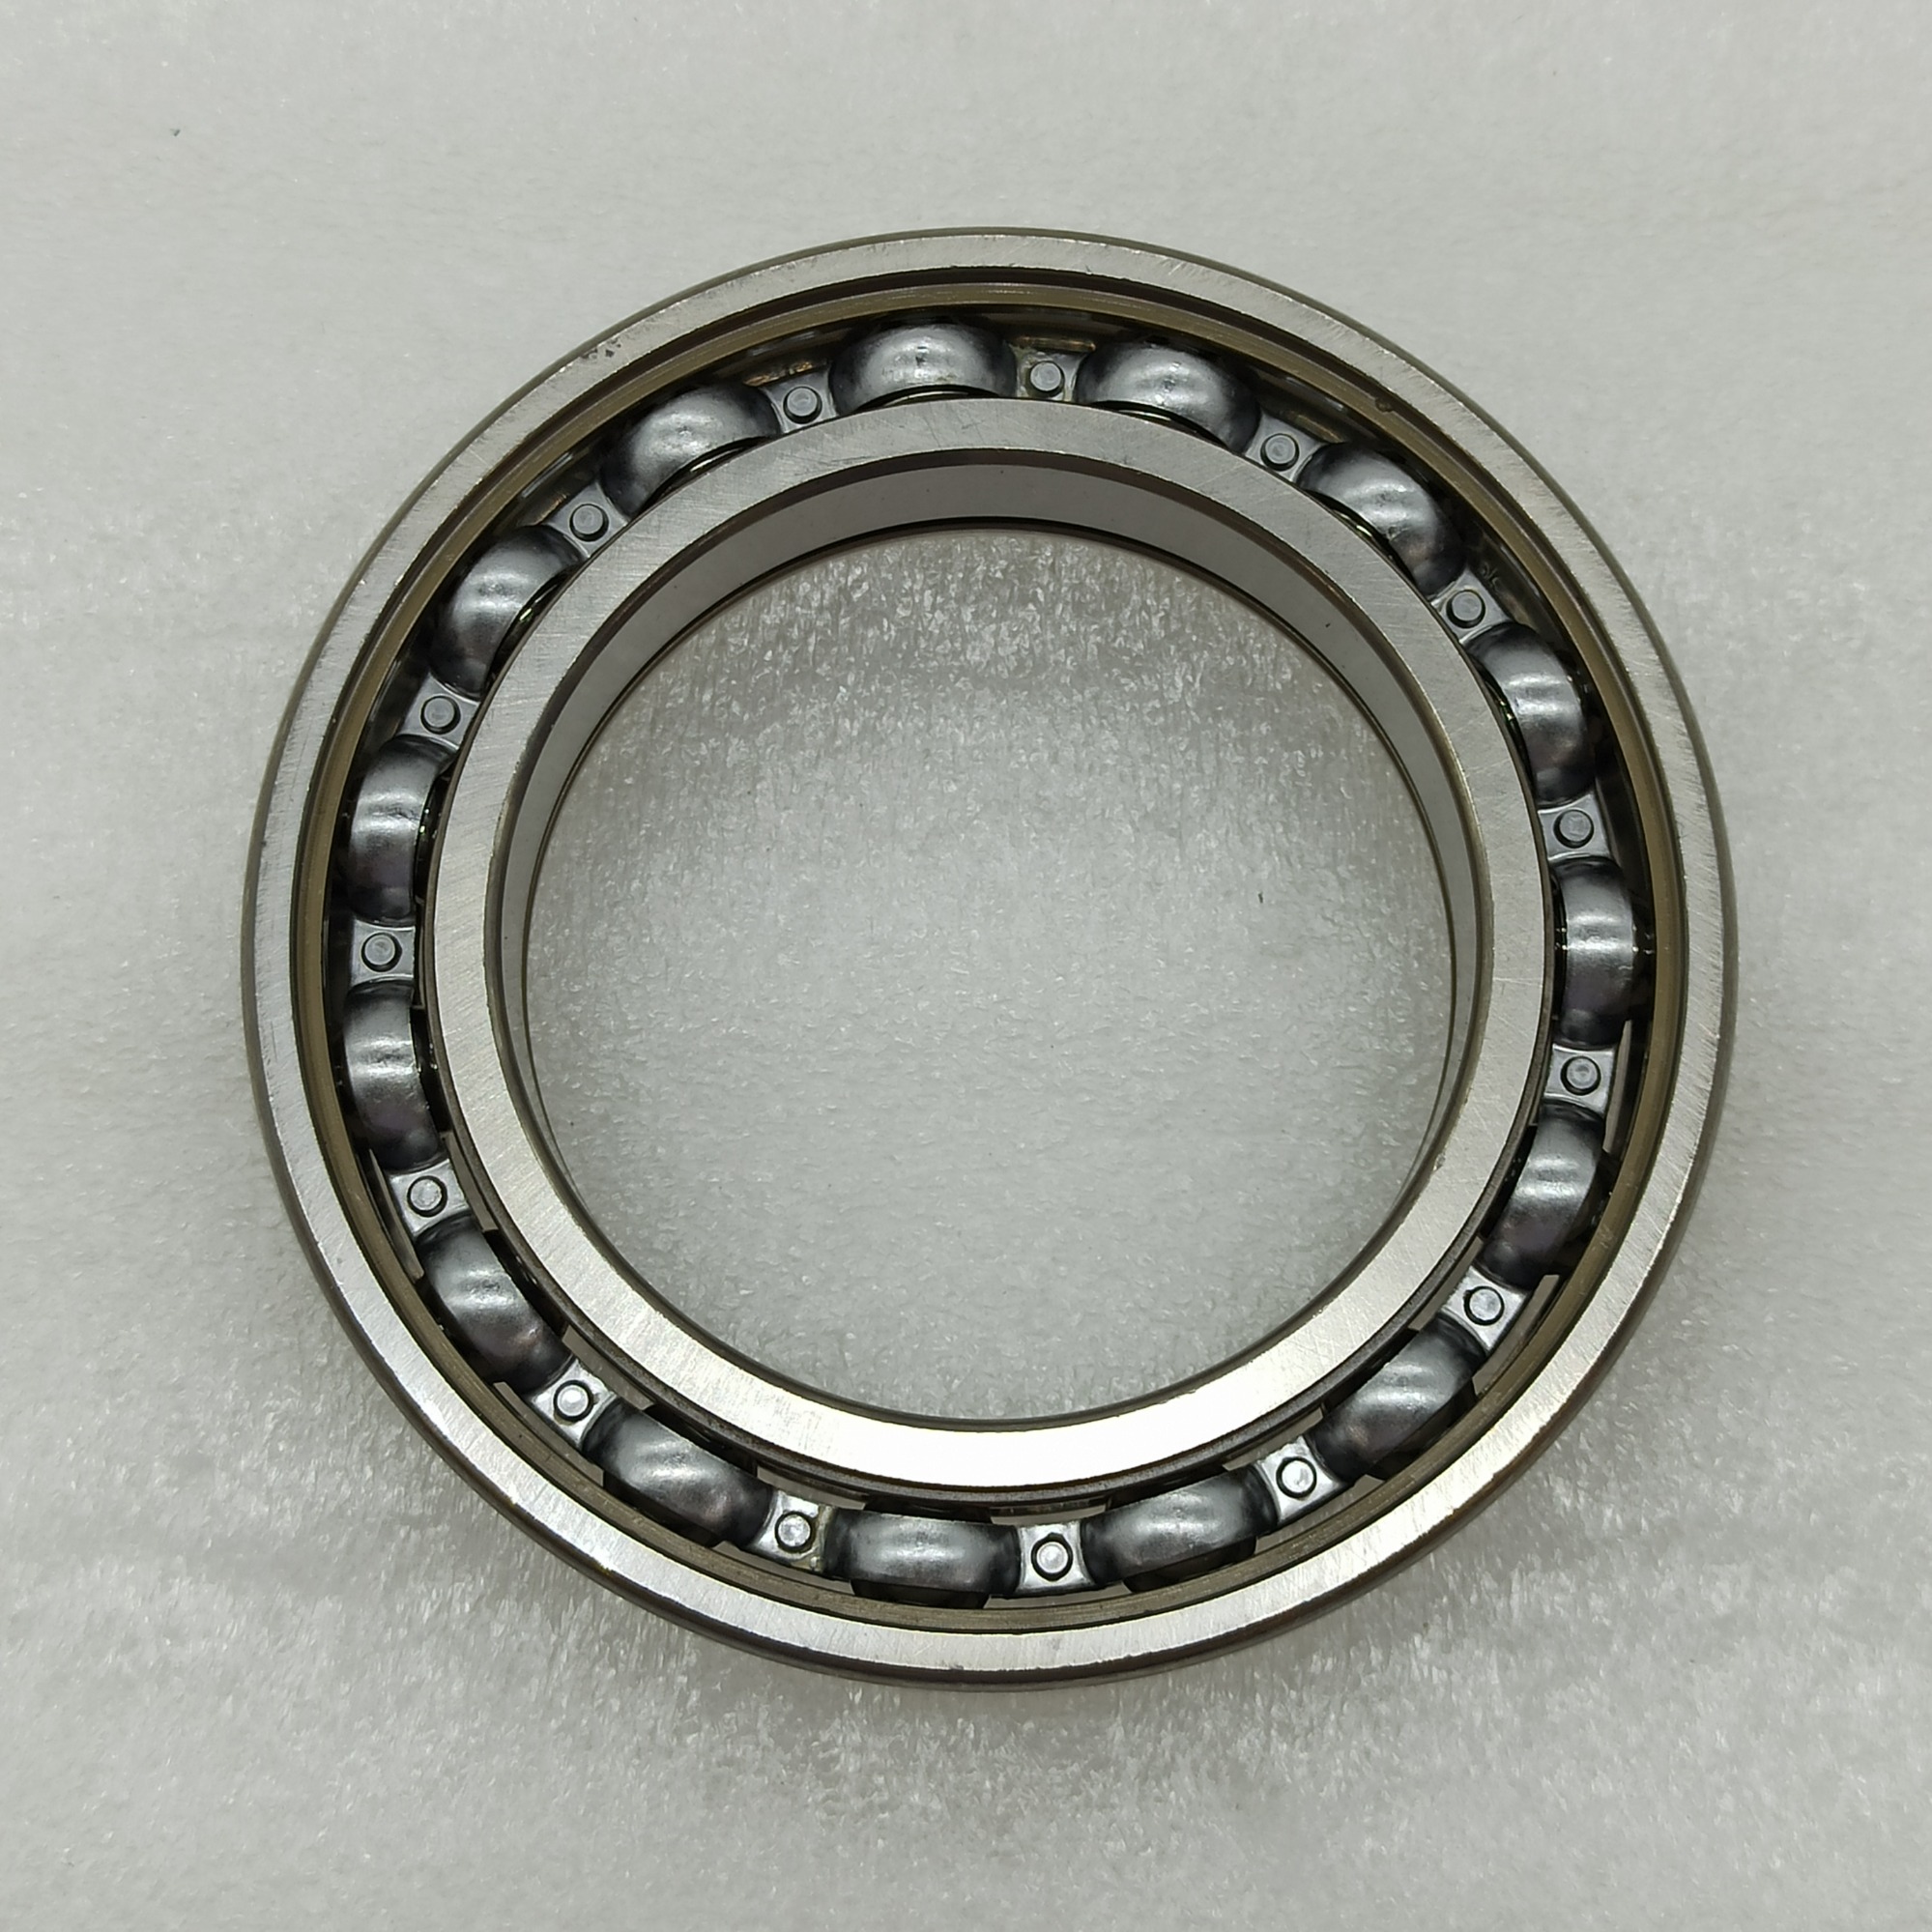 09A-0013-OEM 65TM-02 RE0F09A BEARING JF010E OF CVT Transmission for N issan Infiniti